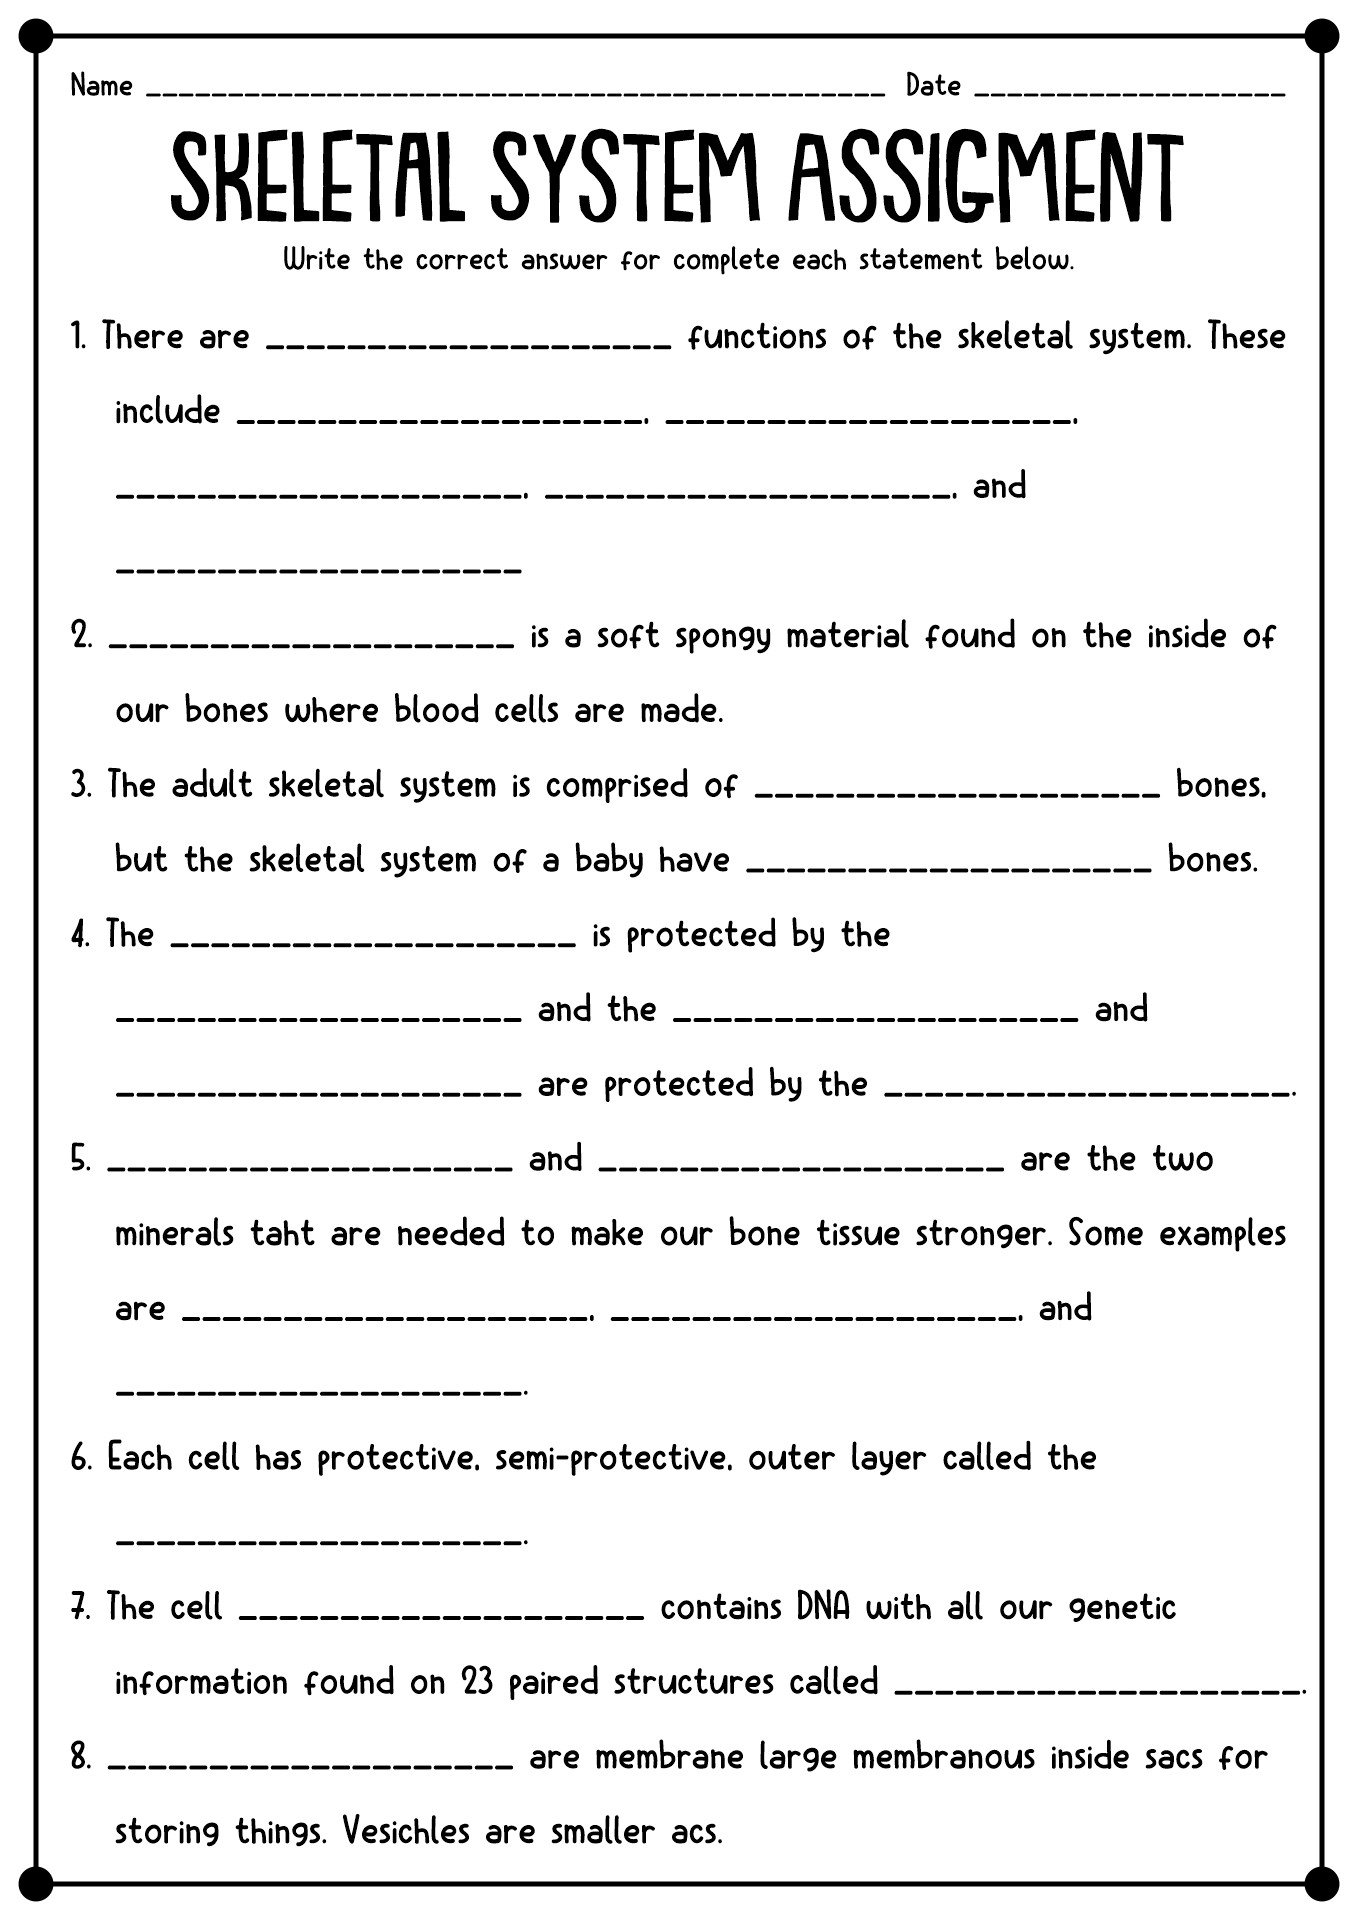 12 Best Images of Science Worksheets All Cells - 7th Grade ...